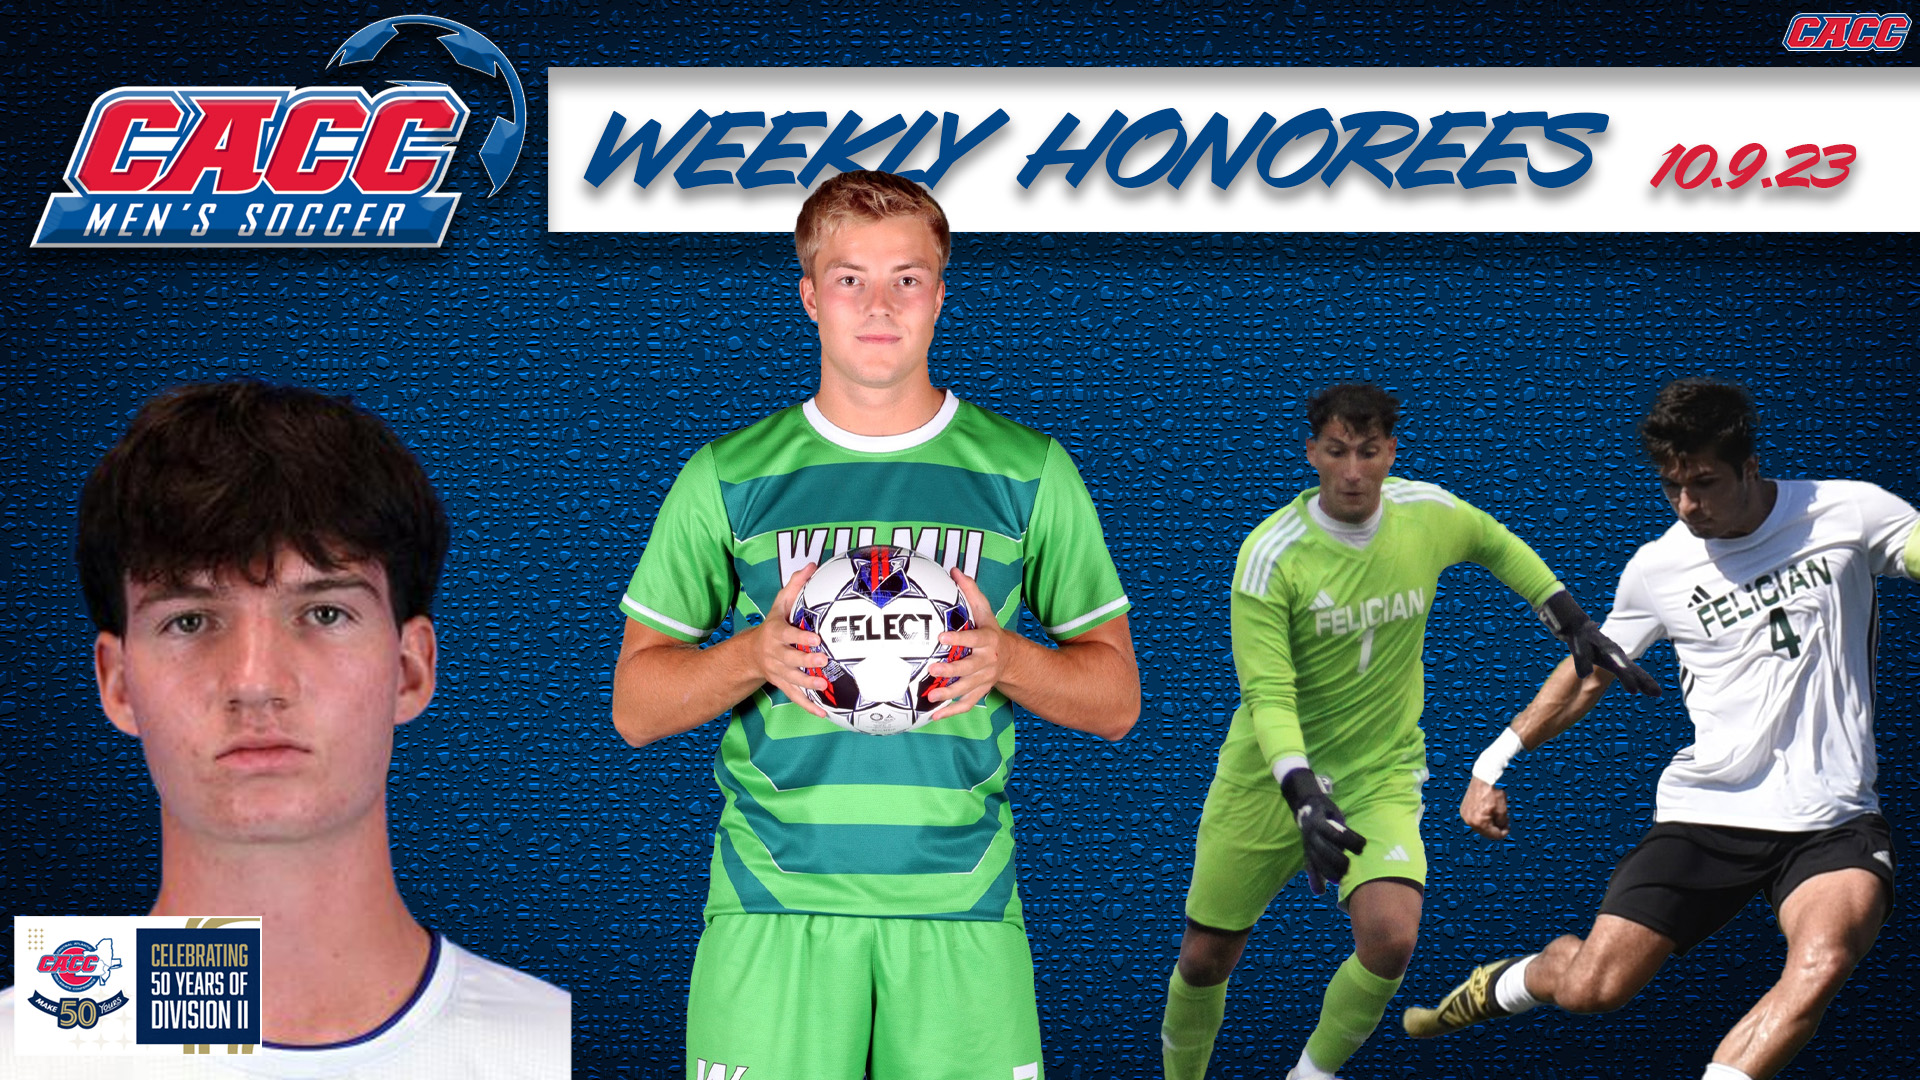 CACC Men's Soccer Weekly Honorees (10-9-23)